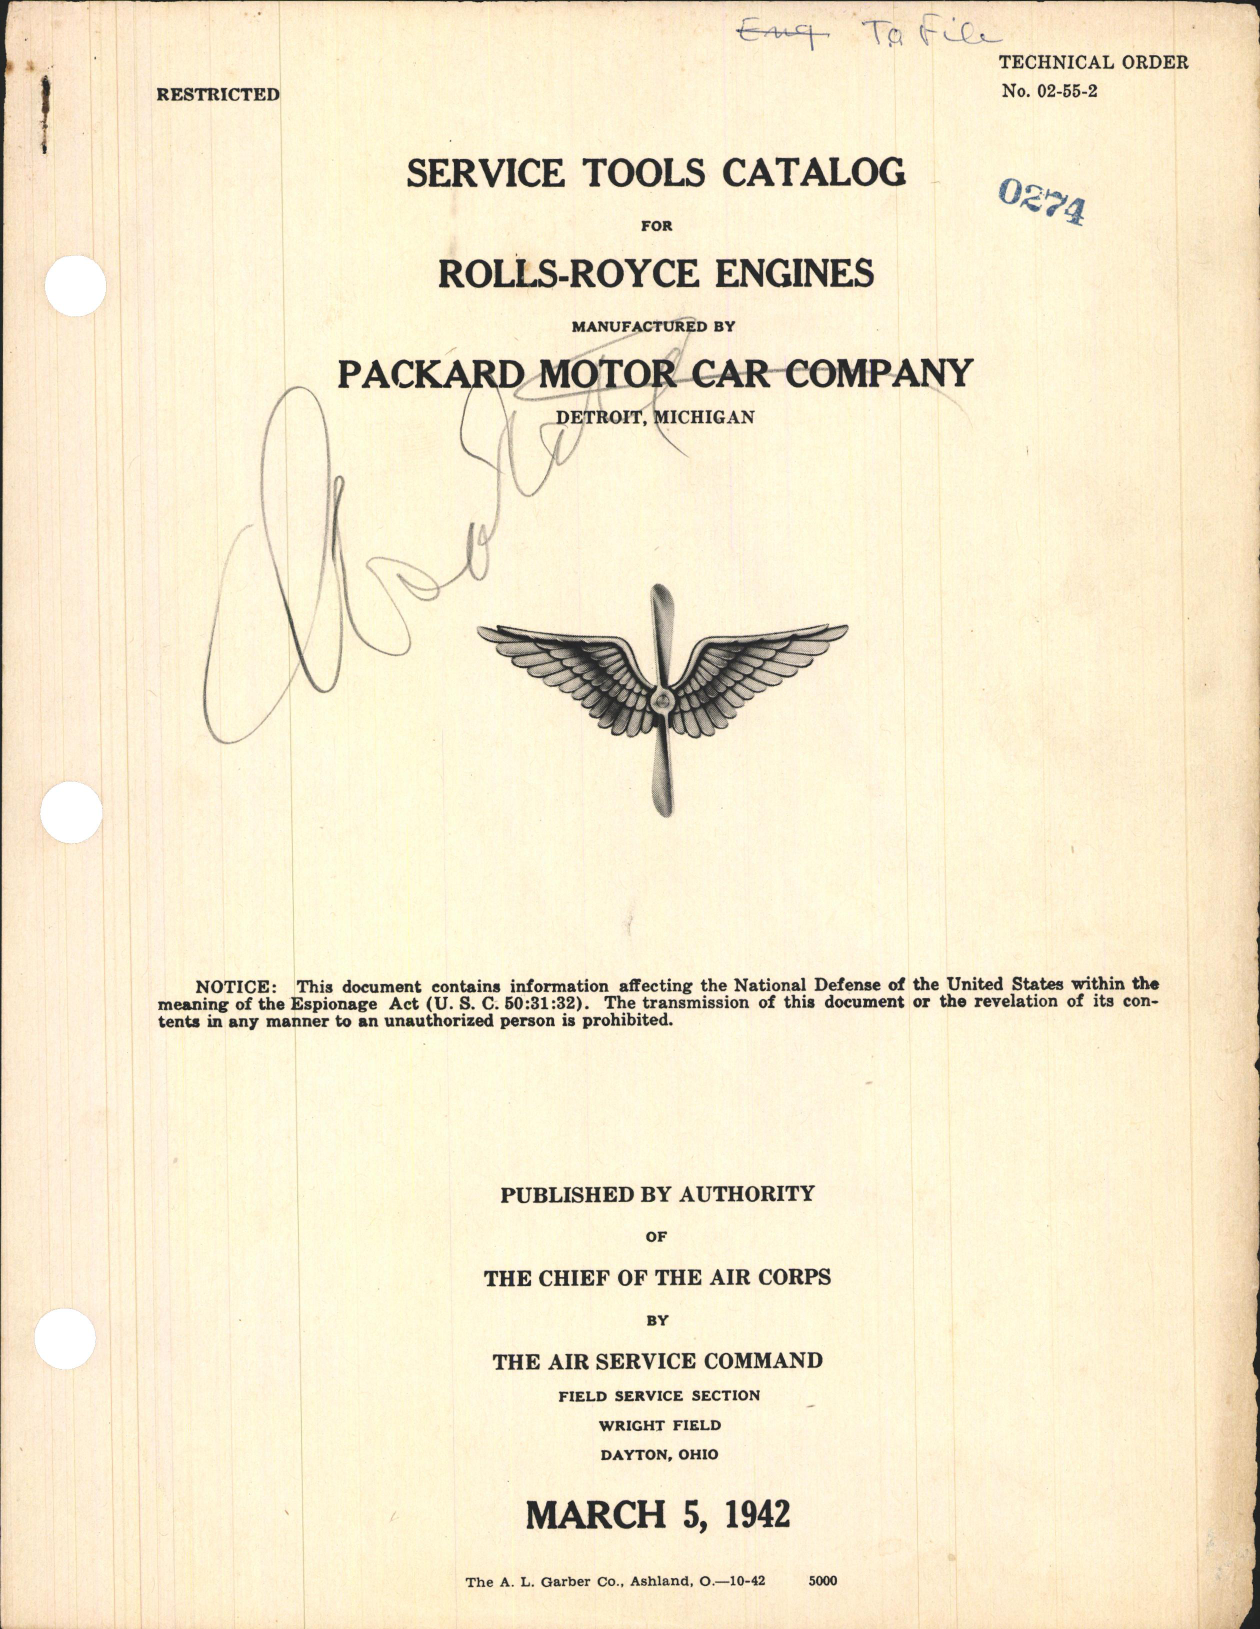 Sample page 1 from AirCorps Library document: Service Tools Catalog for Rolls-Royce Engines Manufactured by Packard Motor Car Company